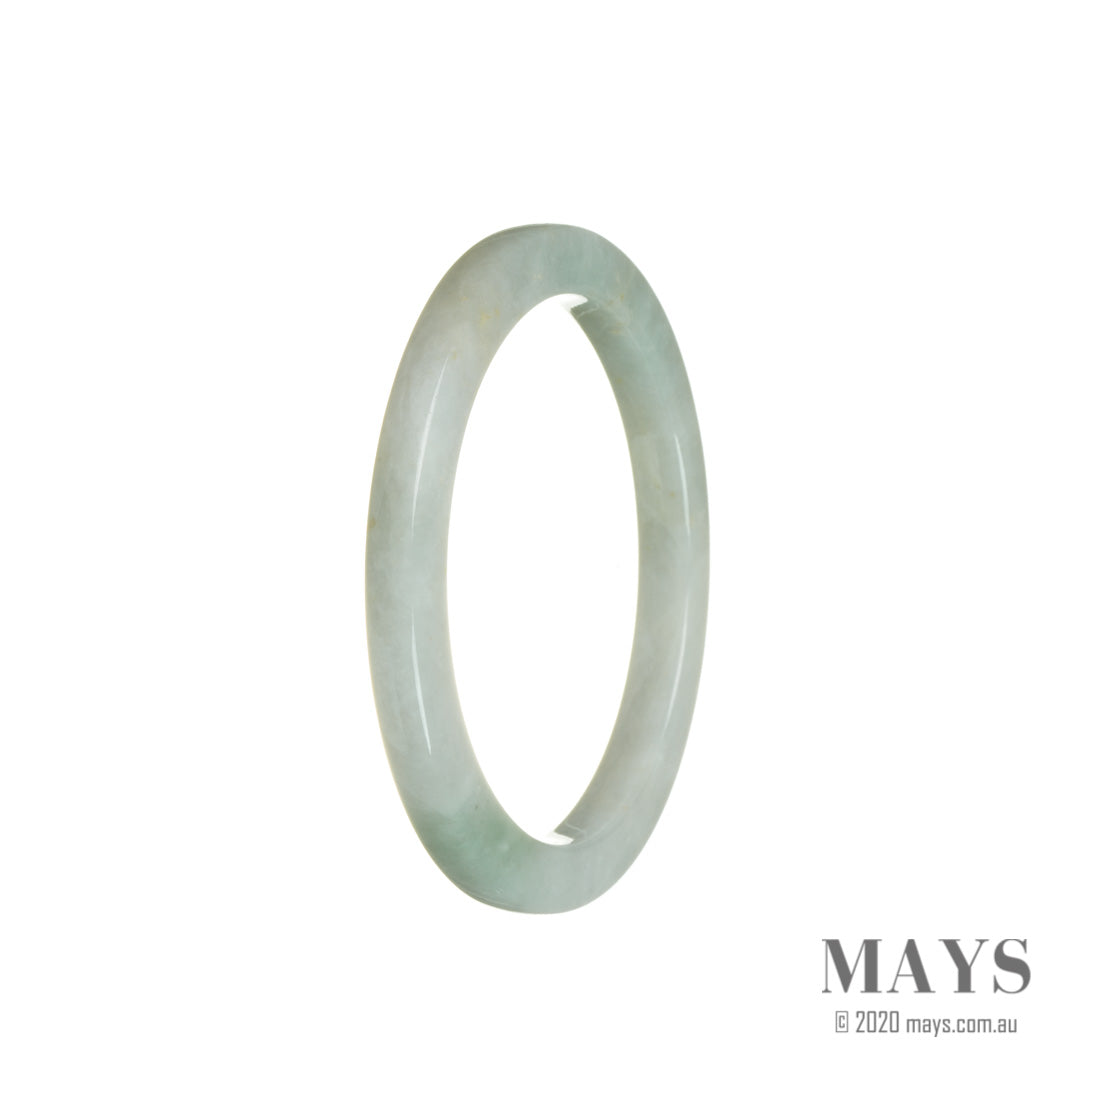 A thin, 56mm authentic Grade A White Jadeite Jade bangle from MAYS.